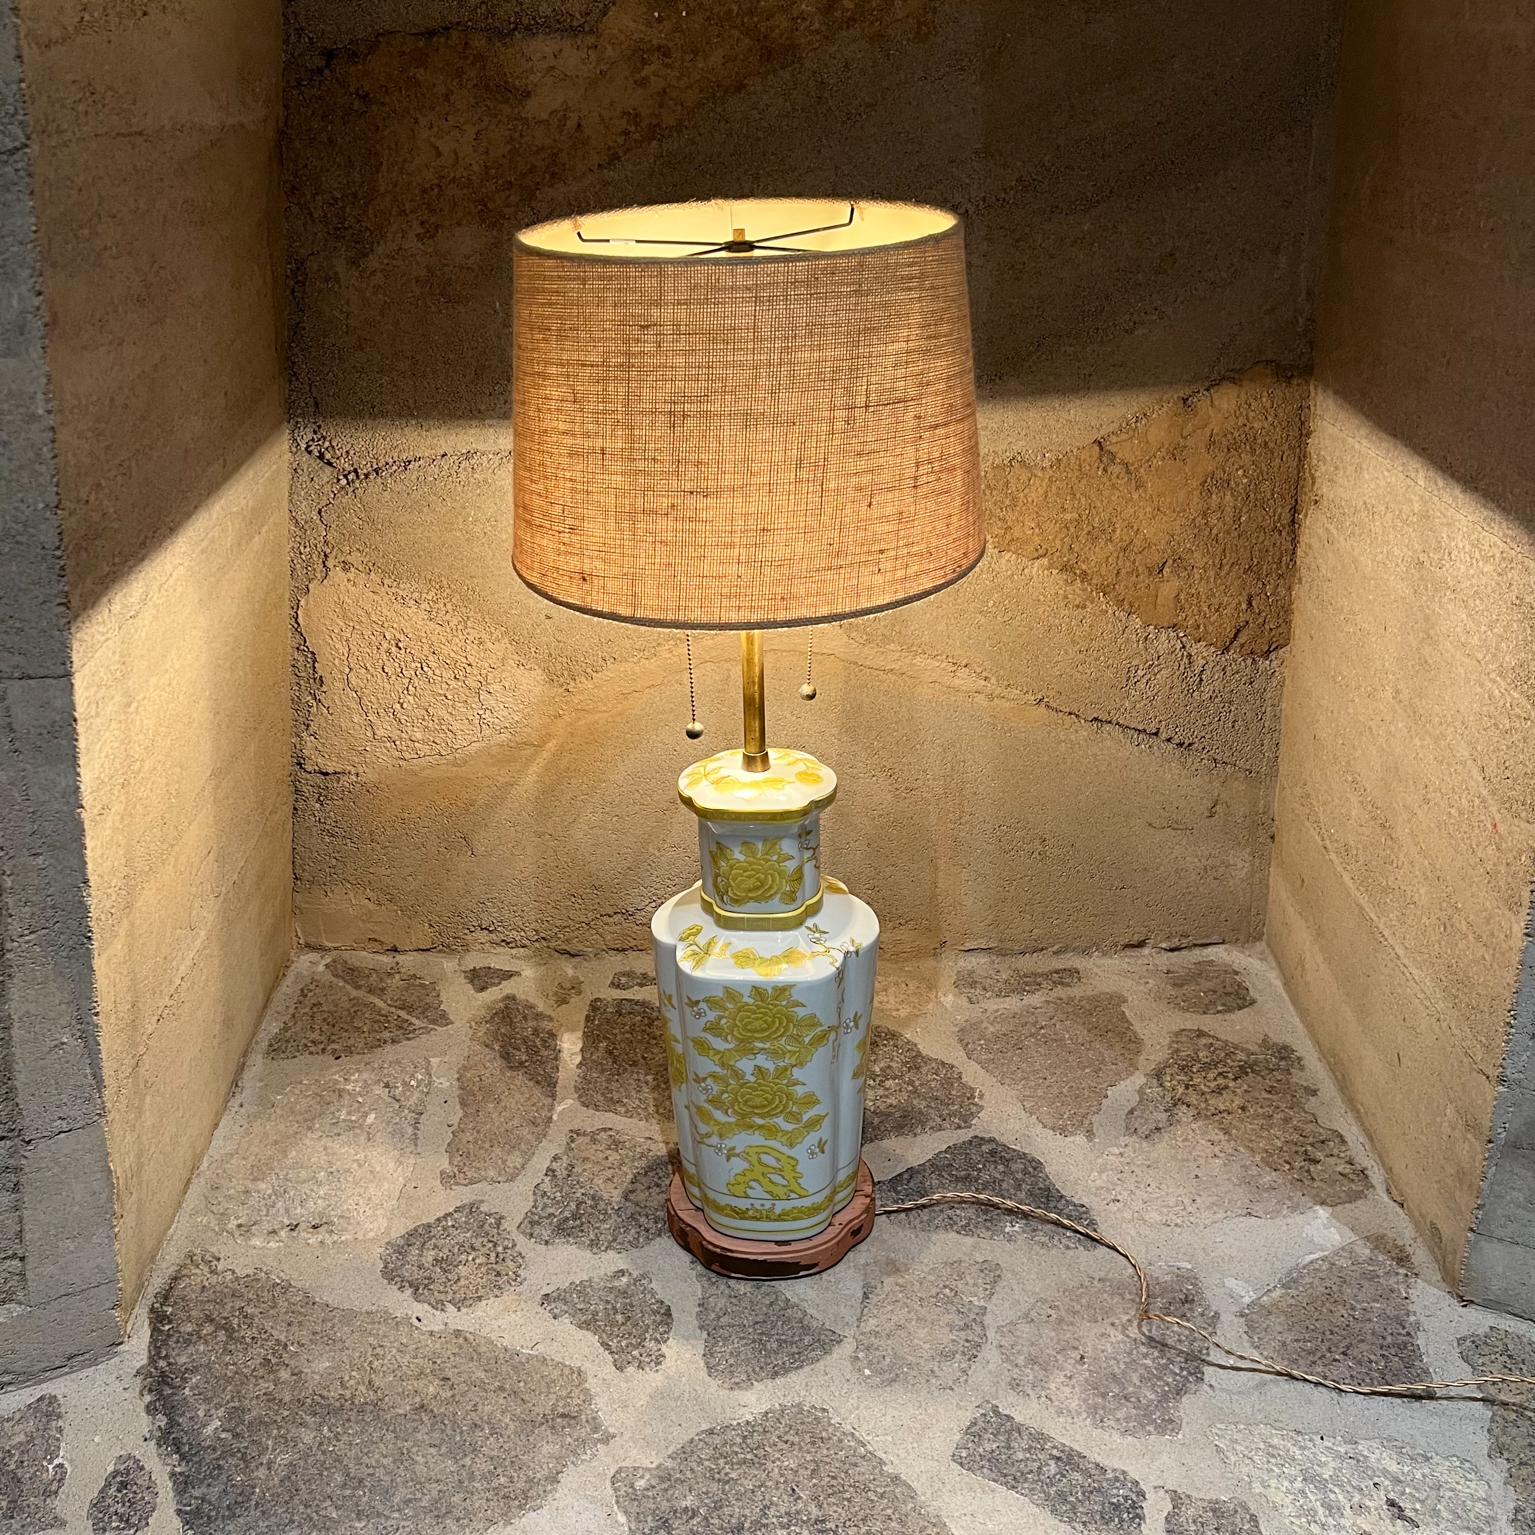 1960s vintage Marbro lamp Co oriental white & yellow ceramic porcelain table lamp on wood base
Measures: 38 tall tip of finial 8.38 width x 7.75 depth
Double Socket Rewired, tested and working.
New twisted gold silk cord. New plug. Wood base is